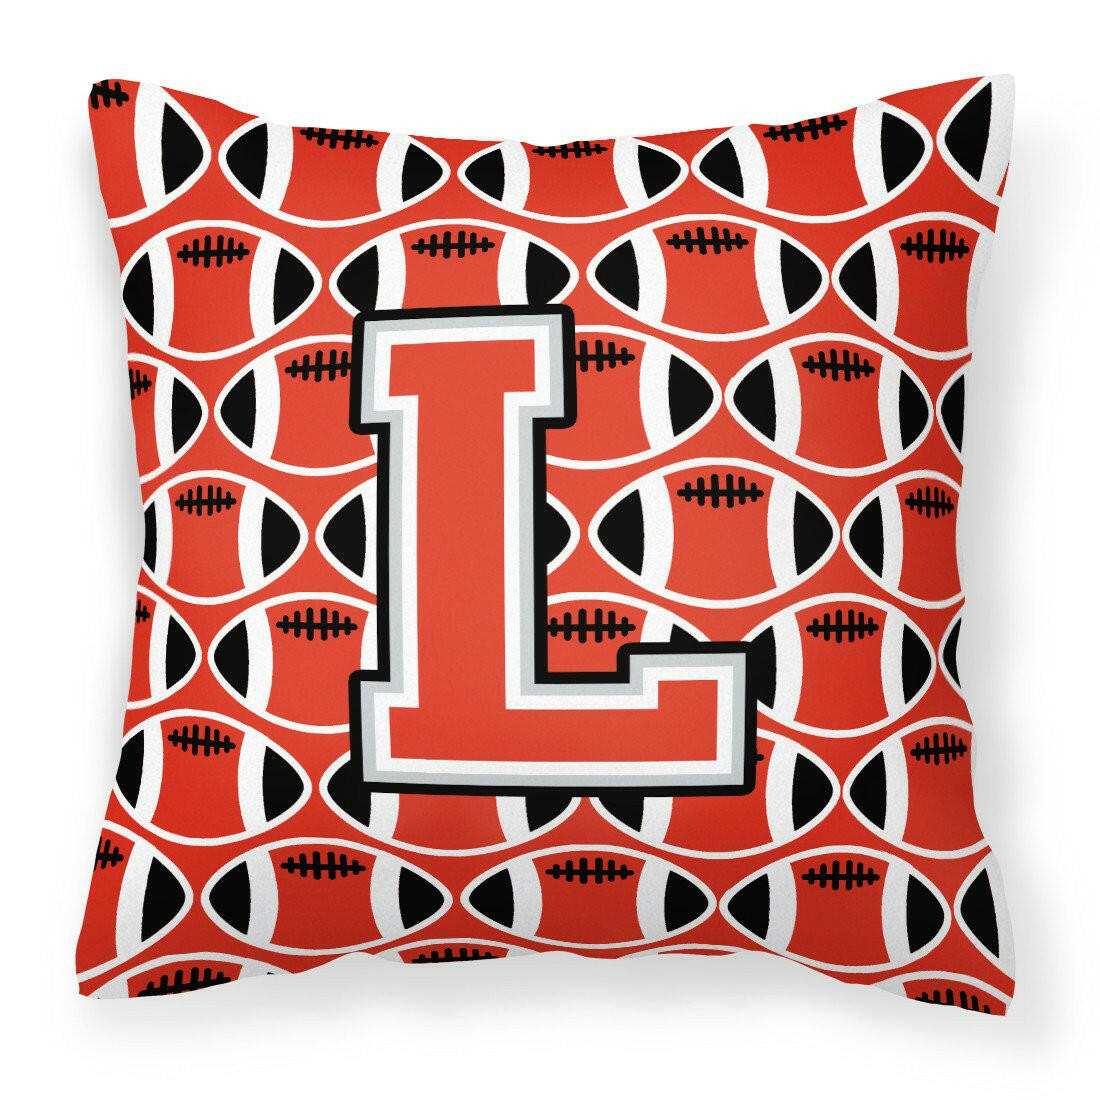 Letter L Football Scarlet and Grey Fabric Decorative Pillow CJ1067-LPW1414 by Caroline's Treasures